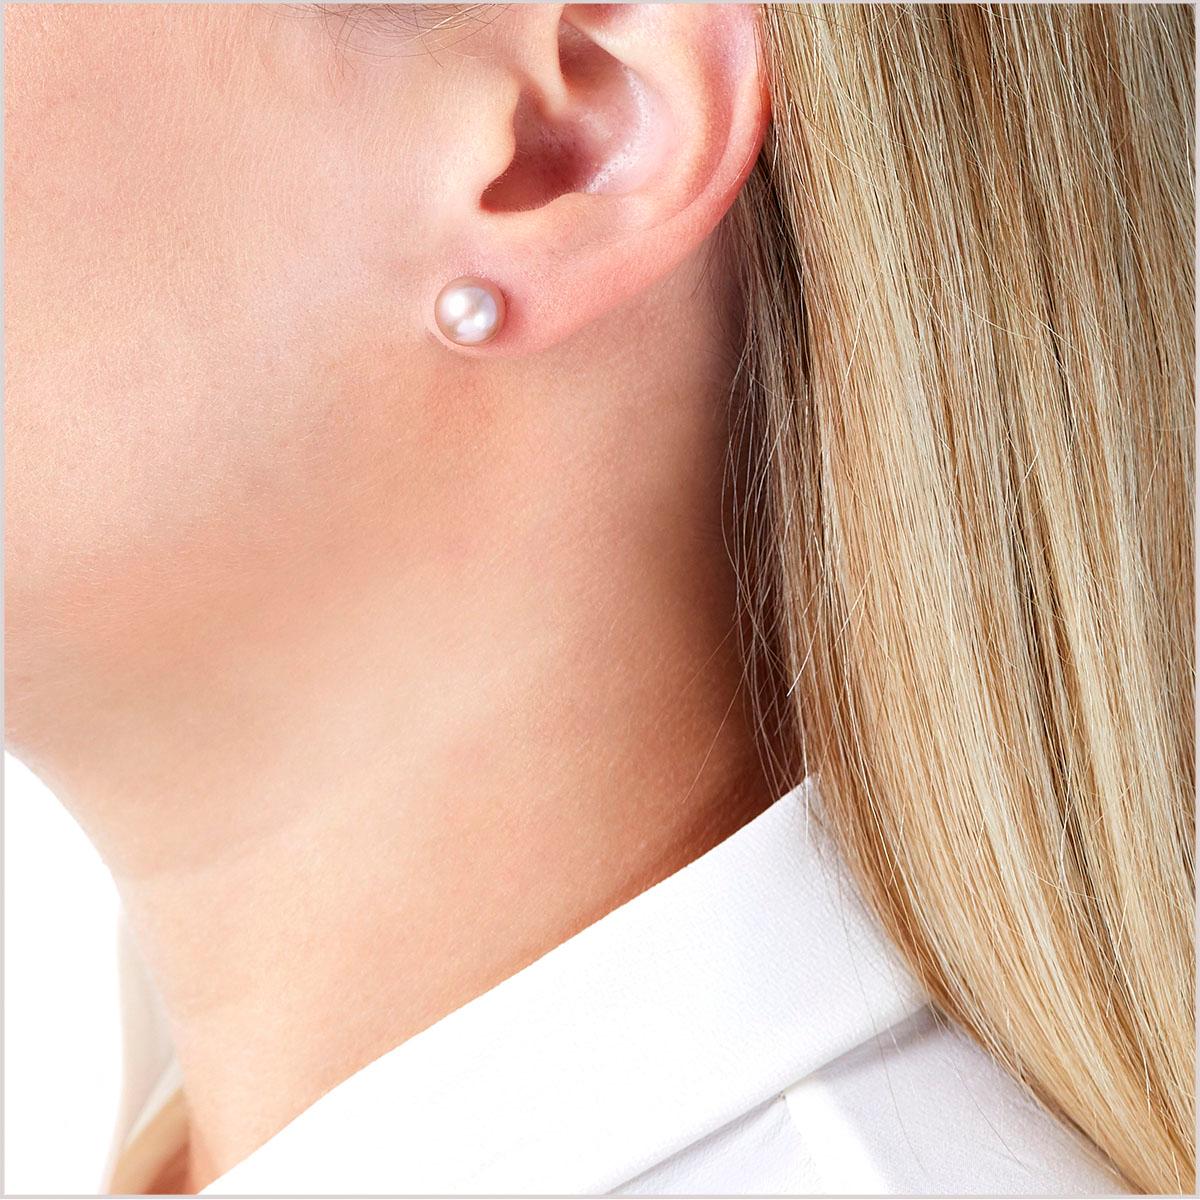 These elegant natural-coloured Pink Freshwater pearl studs by Yoko London are a jewellery box essential. The simple 18 Karat White Gold setting allows the beautiful colour and lustre of the pearls to speak for themselves. Pair with any outfit to add